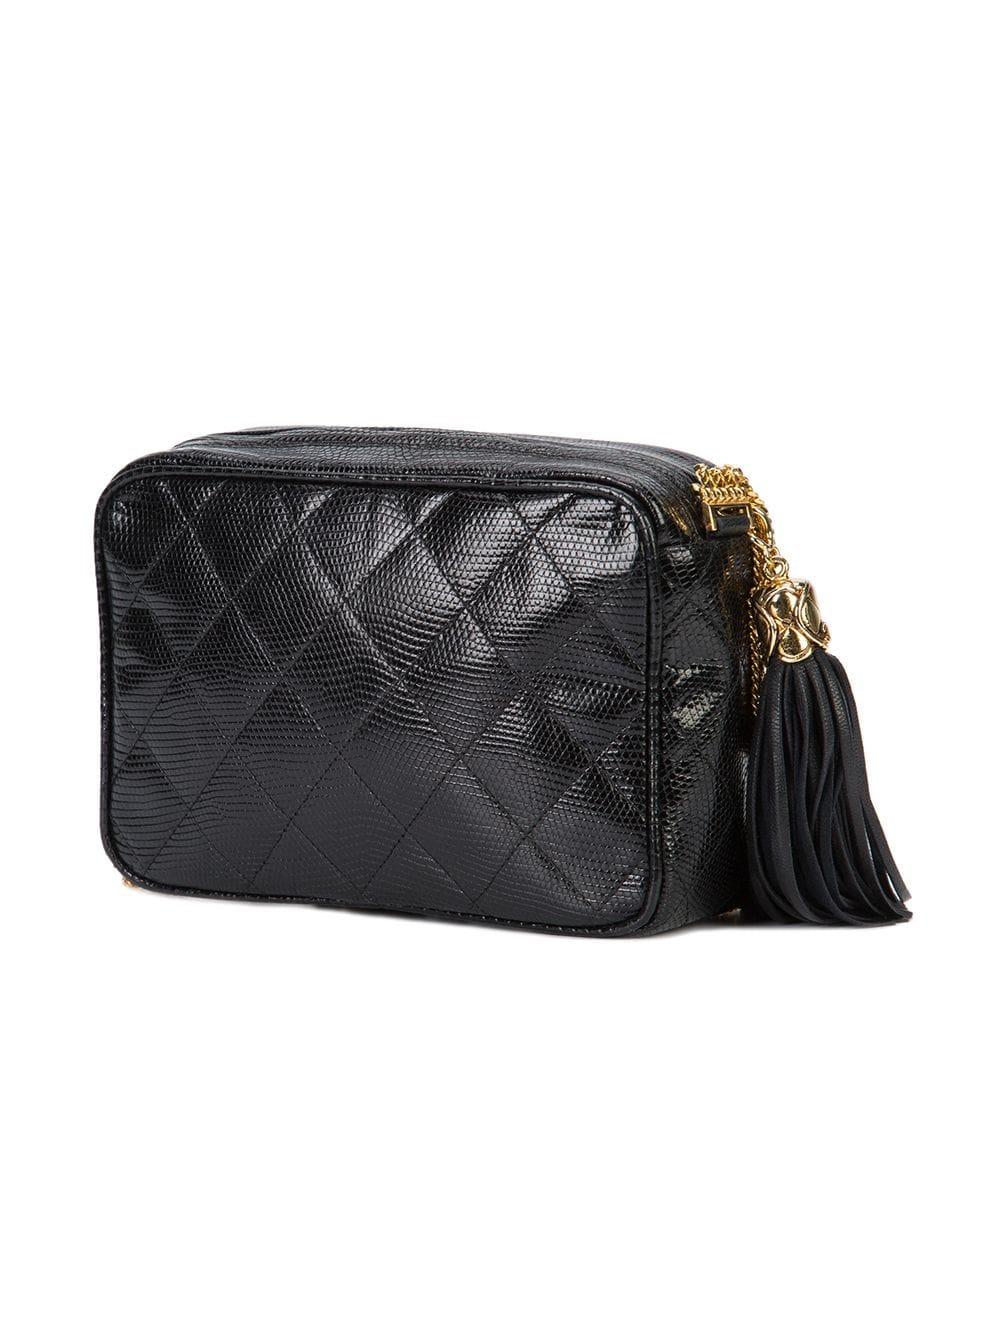 chanel exotic leather